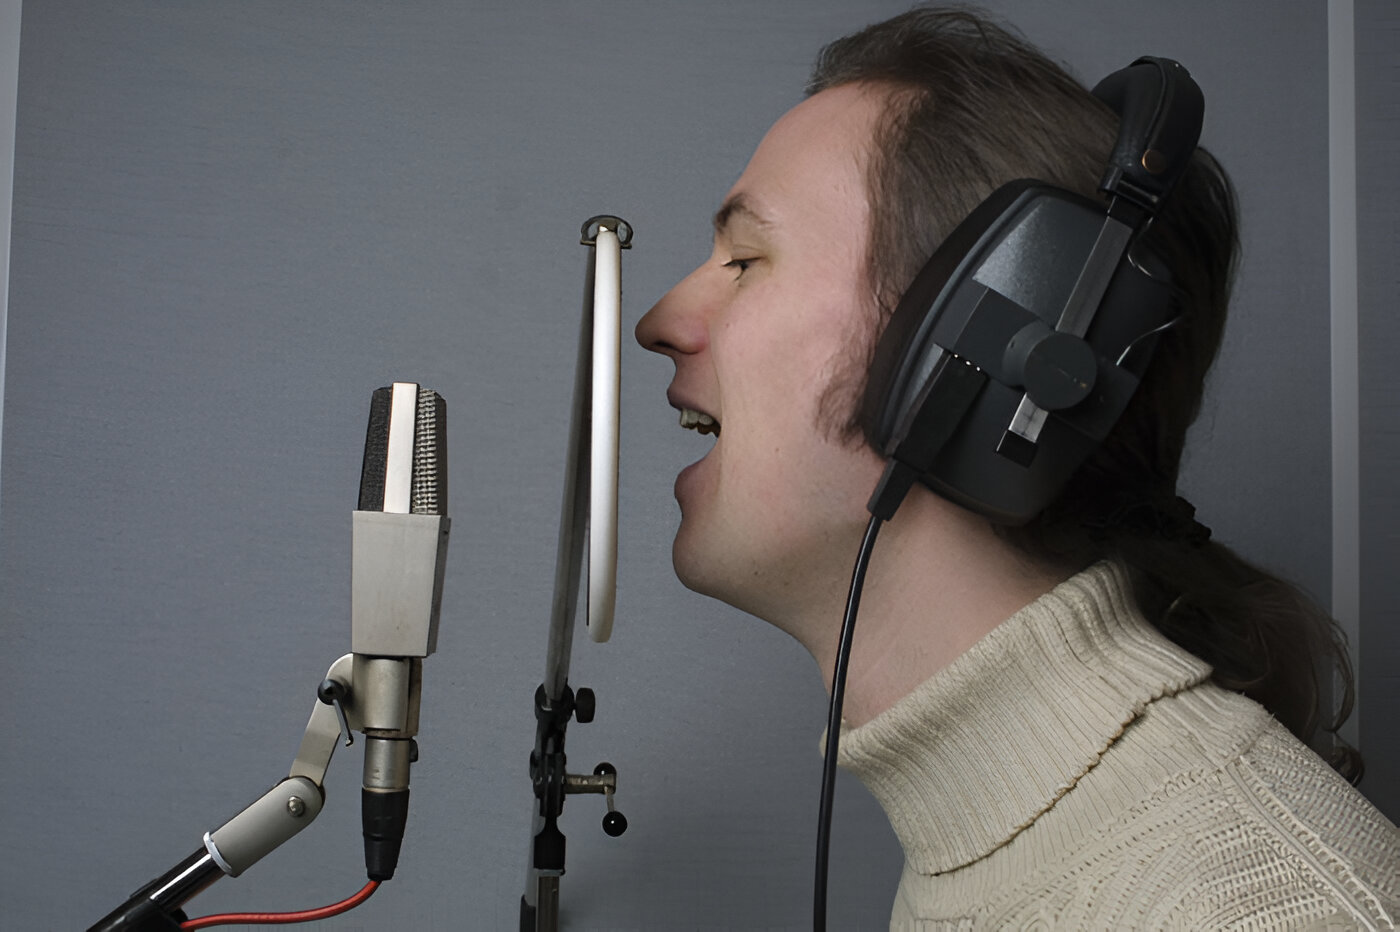 How To Position A Condenser Microphone